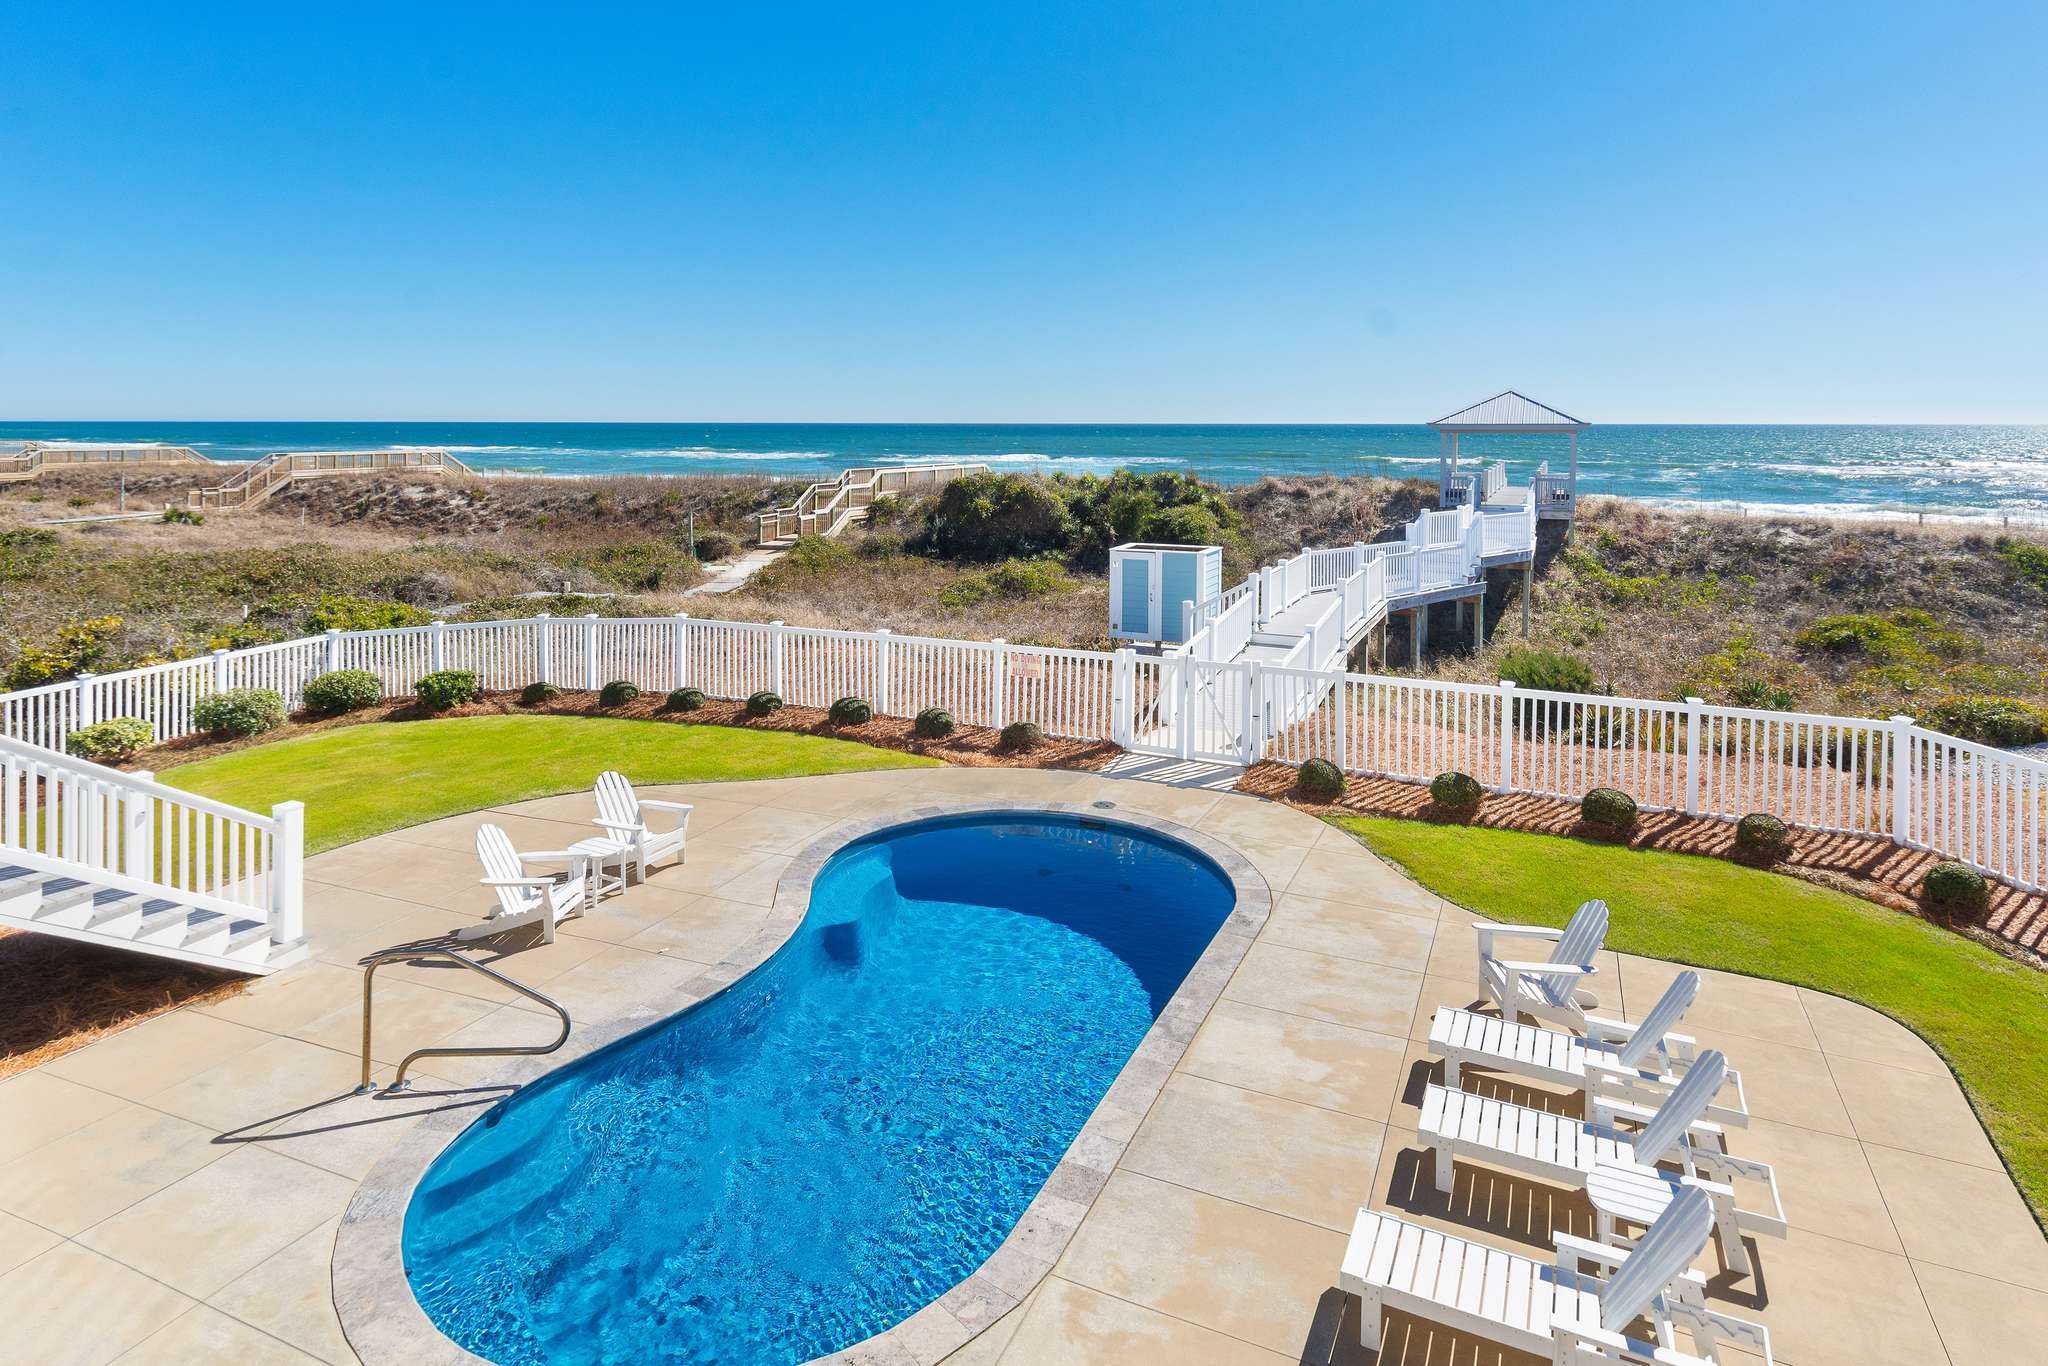 Vacation rentals just steps away from the beach